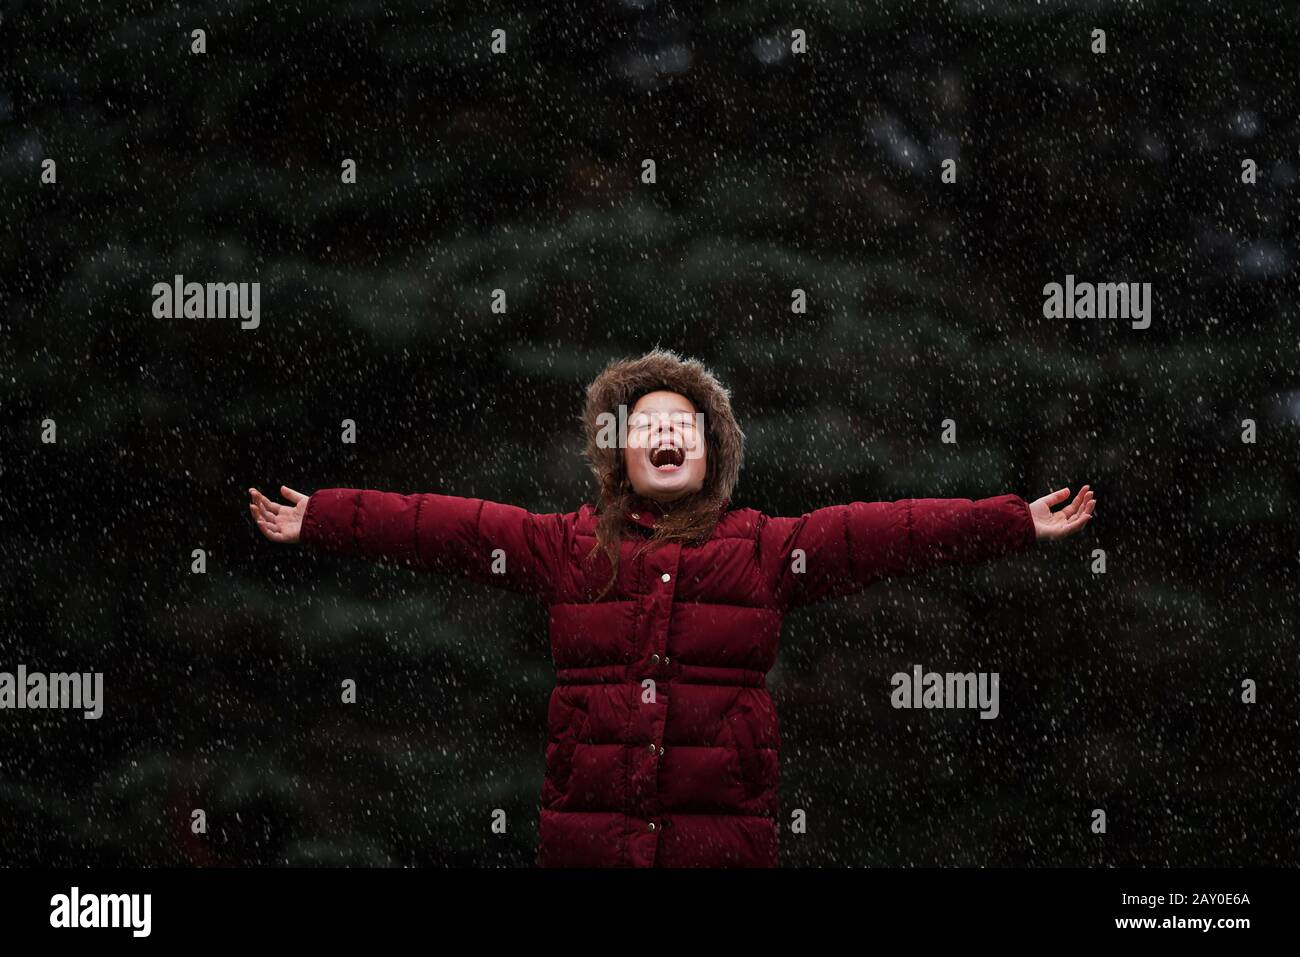 Happy girl standing outdoors in the snow, USA Stock Photo